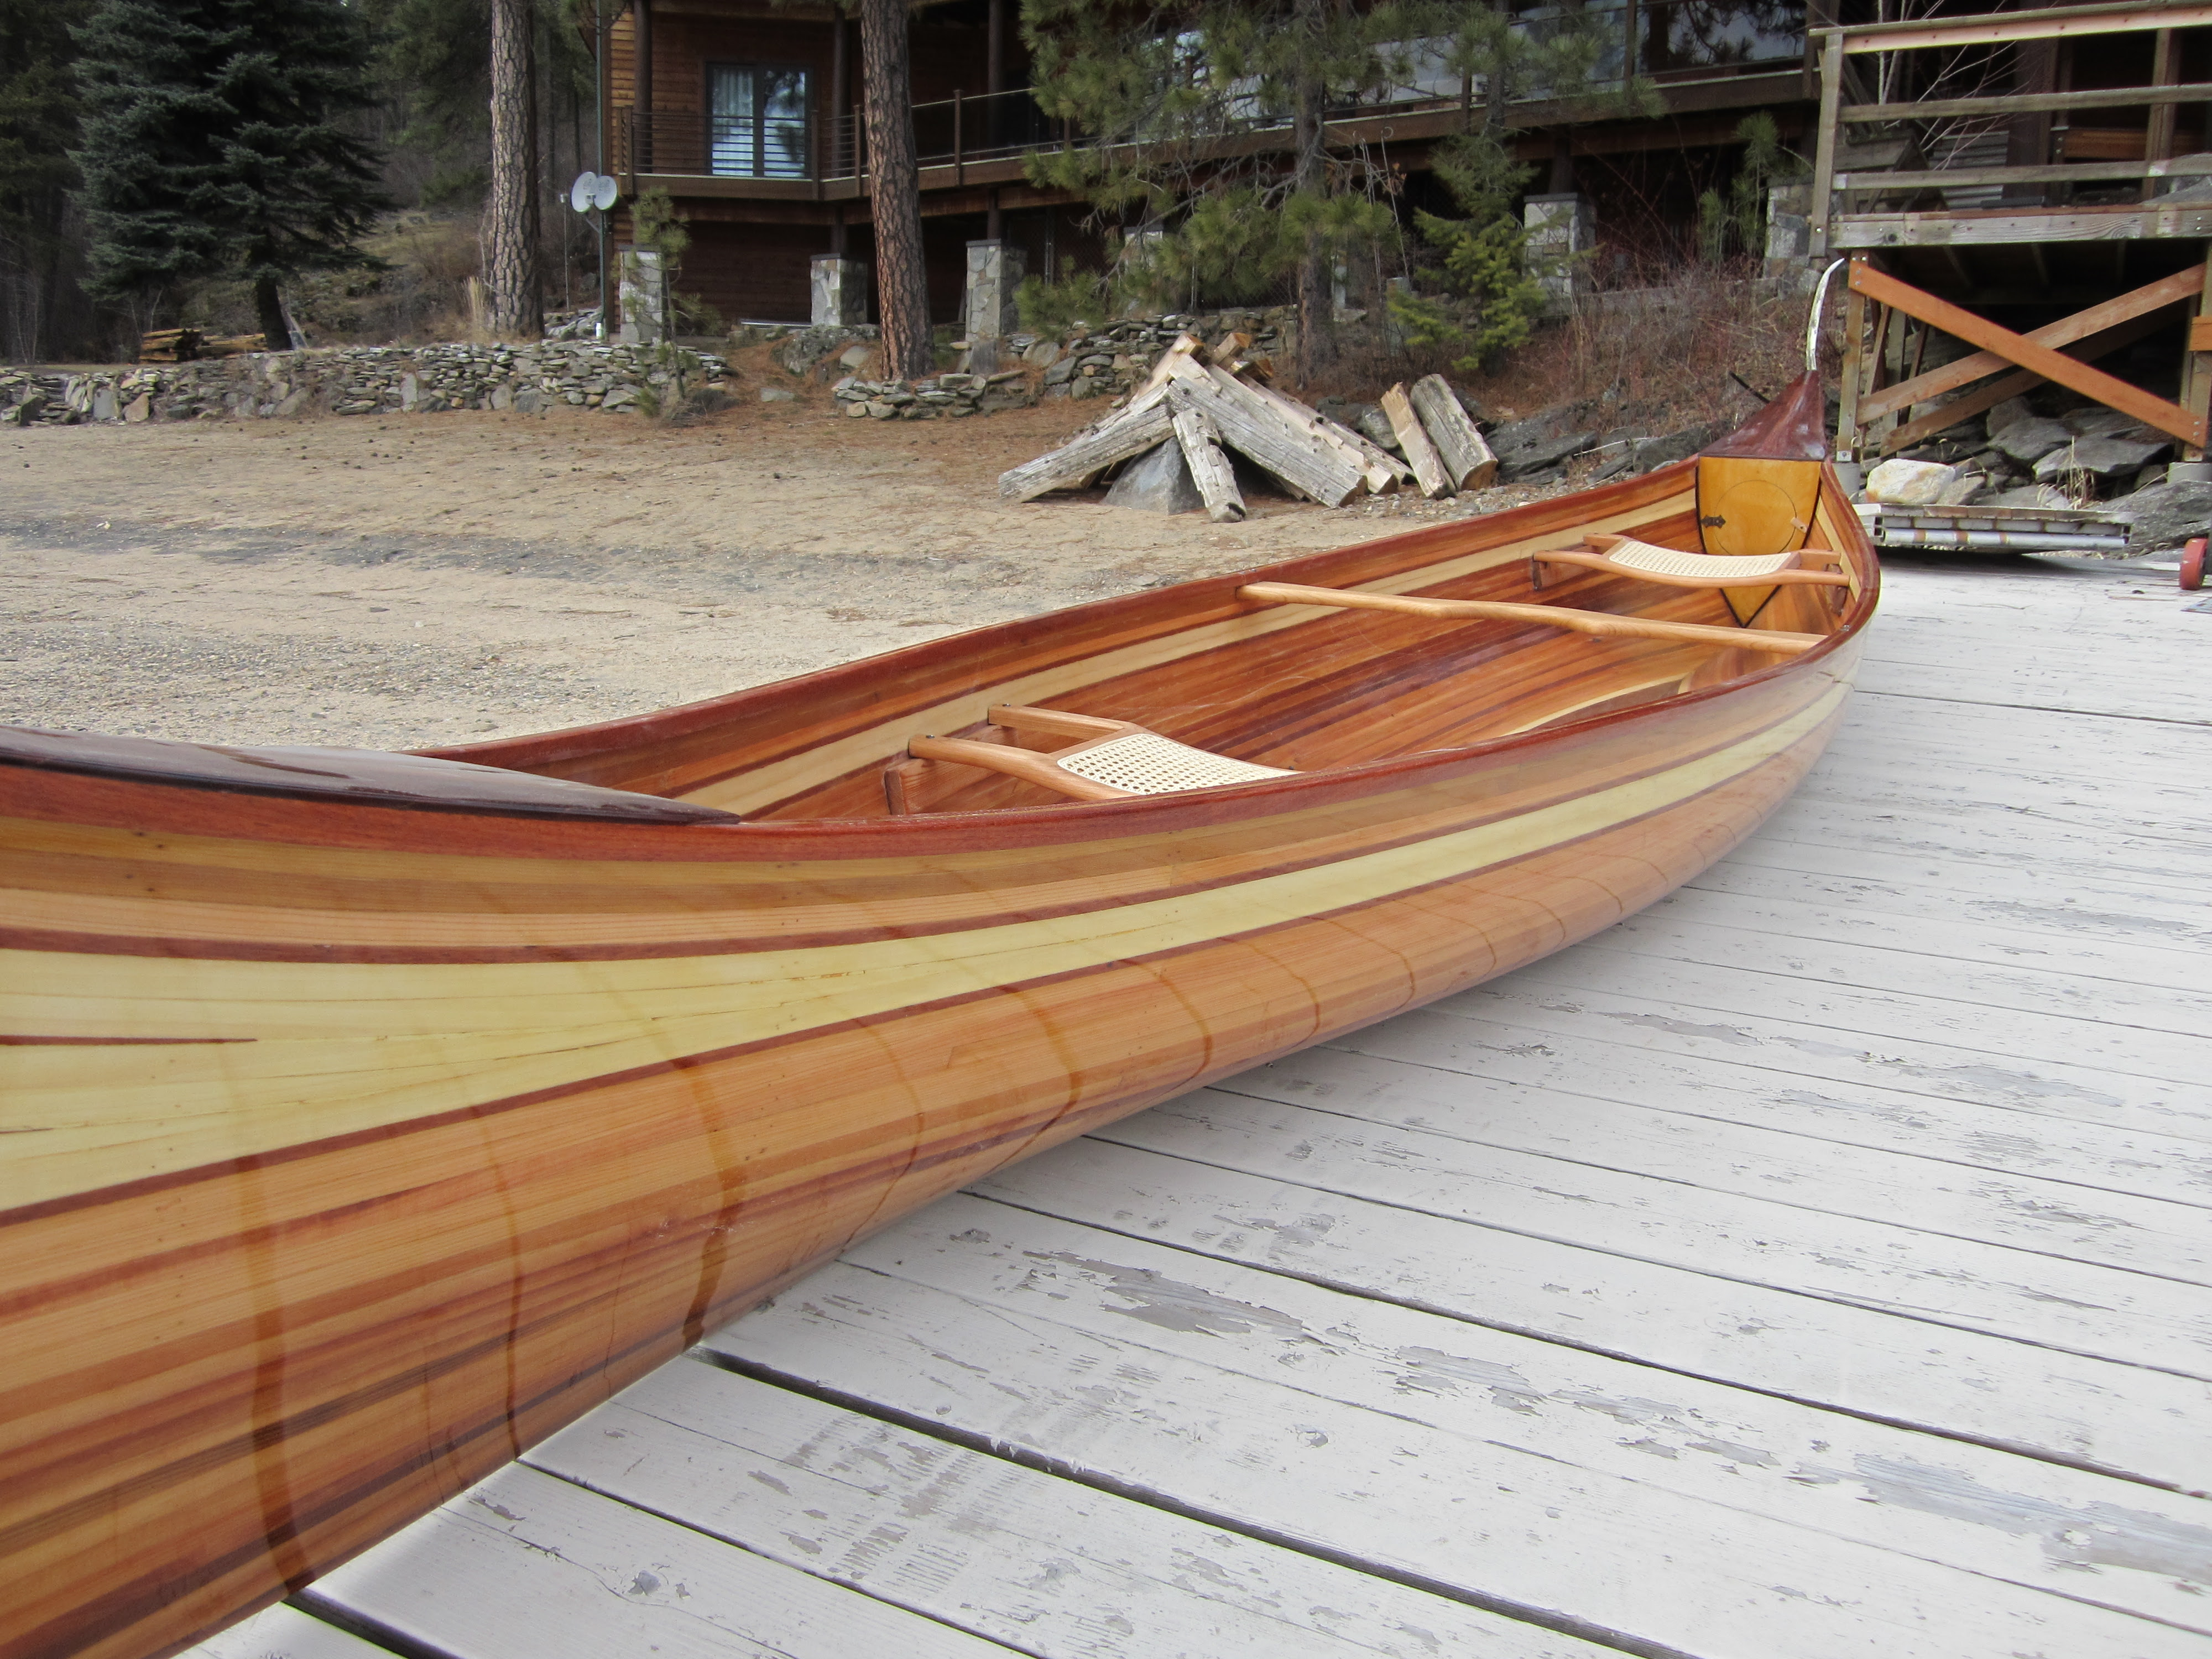 siskiwit bay multi-chined kayak plans for plywood building